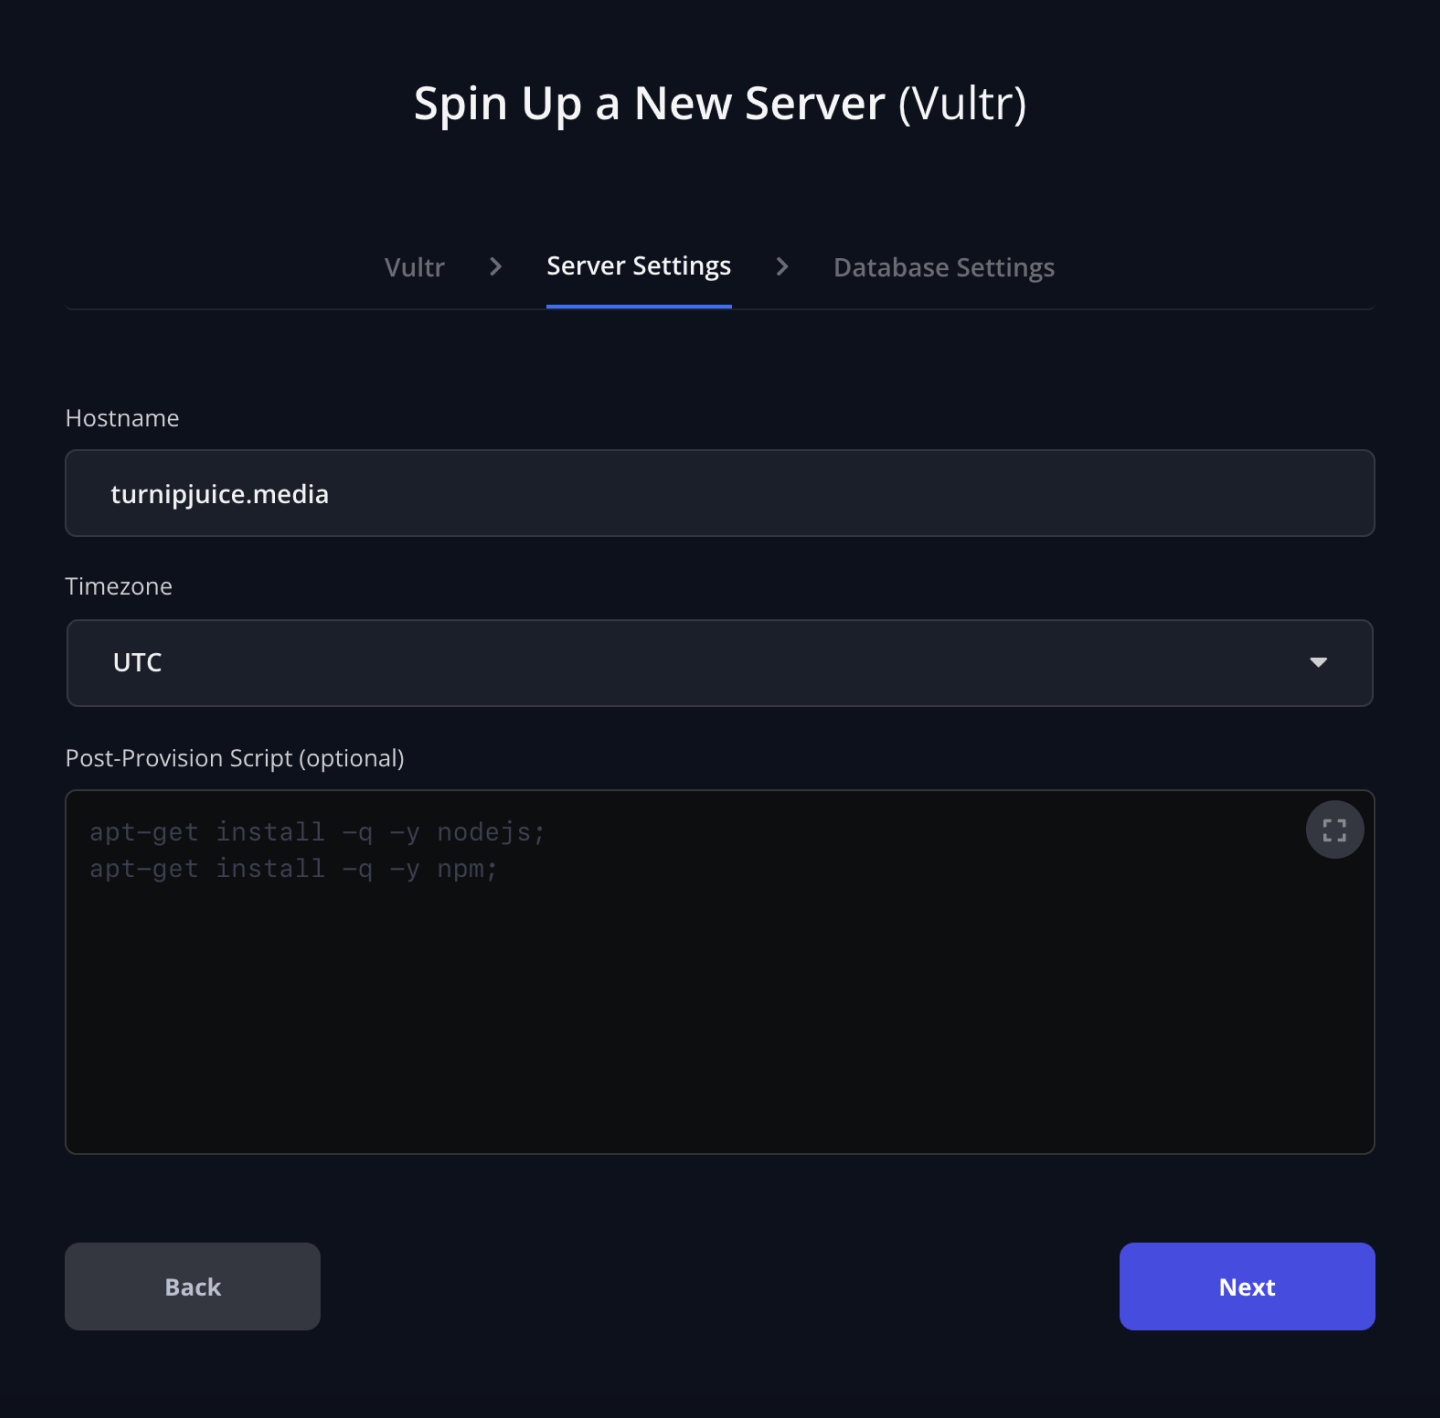 Connect SpinupWP to your new Vultr server